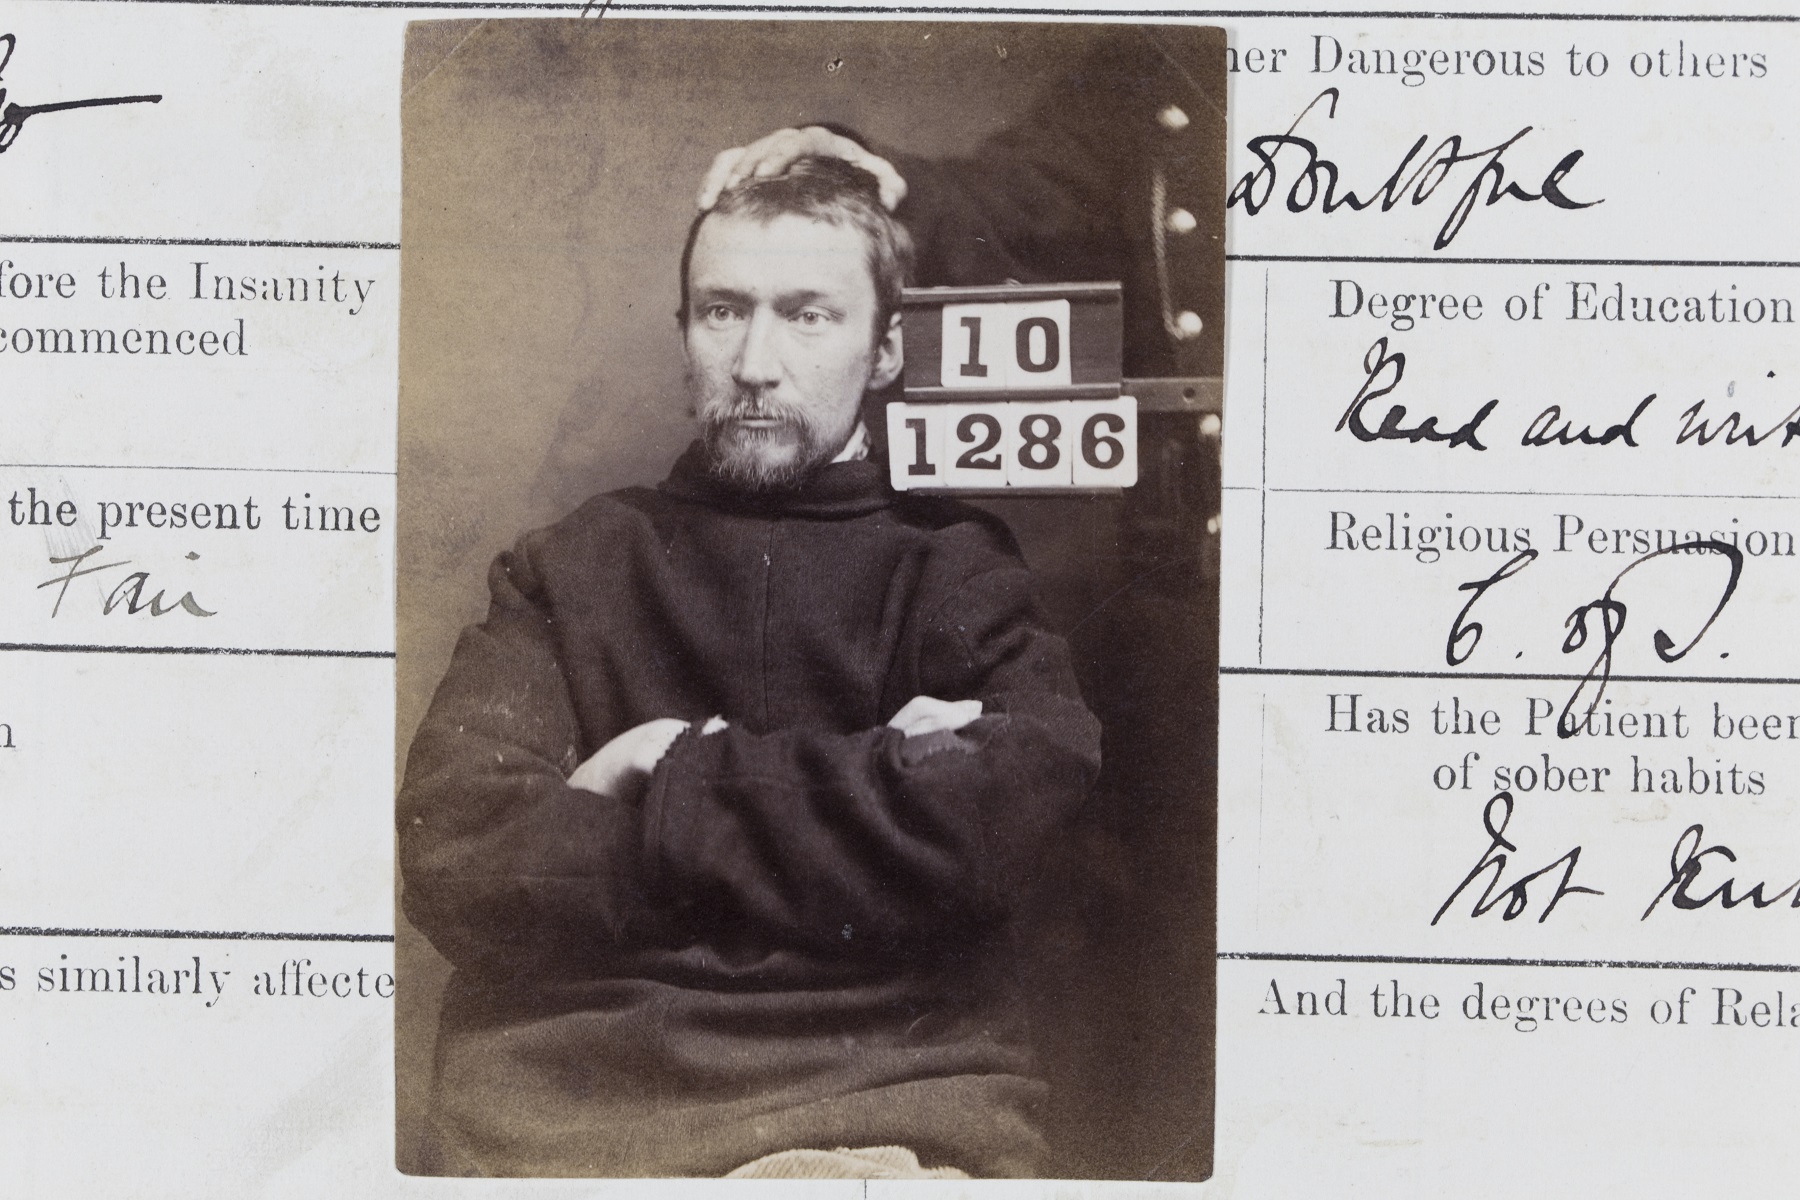 William Porter’s photograph from the Criminal Lunatic Department Case Book